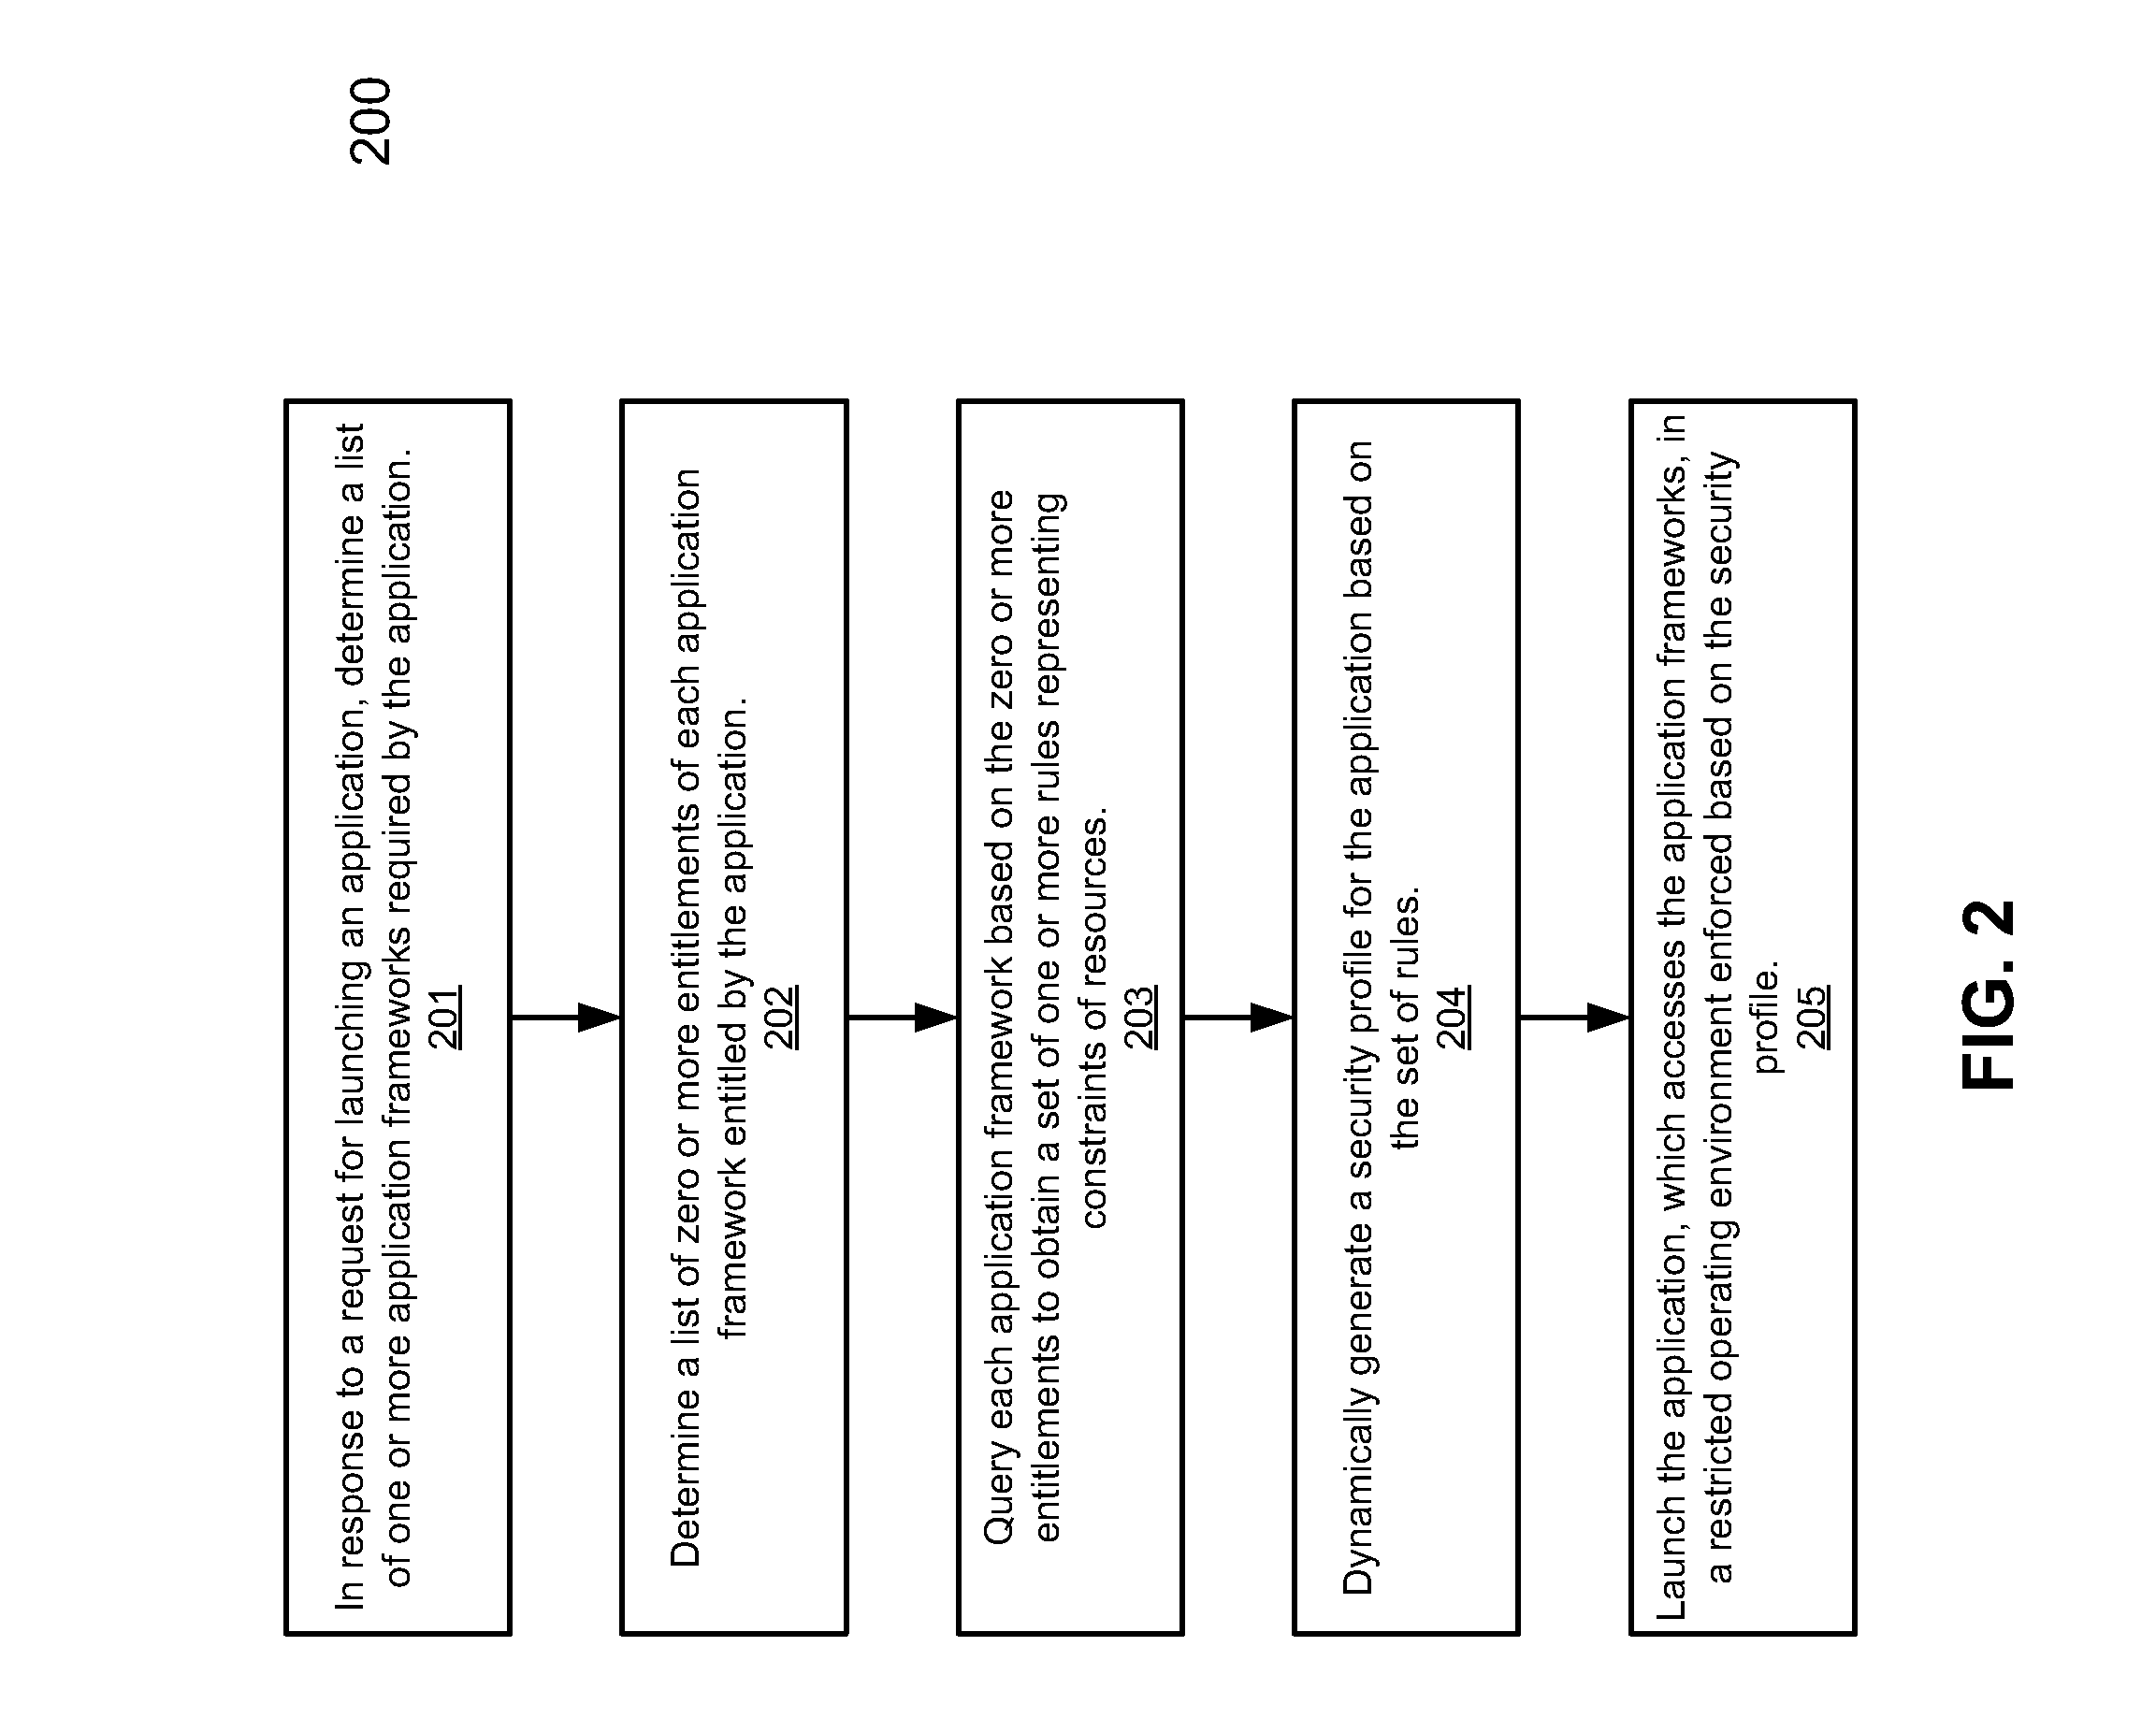 Methods for restricting resources used by a program based on entitlements